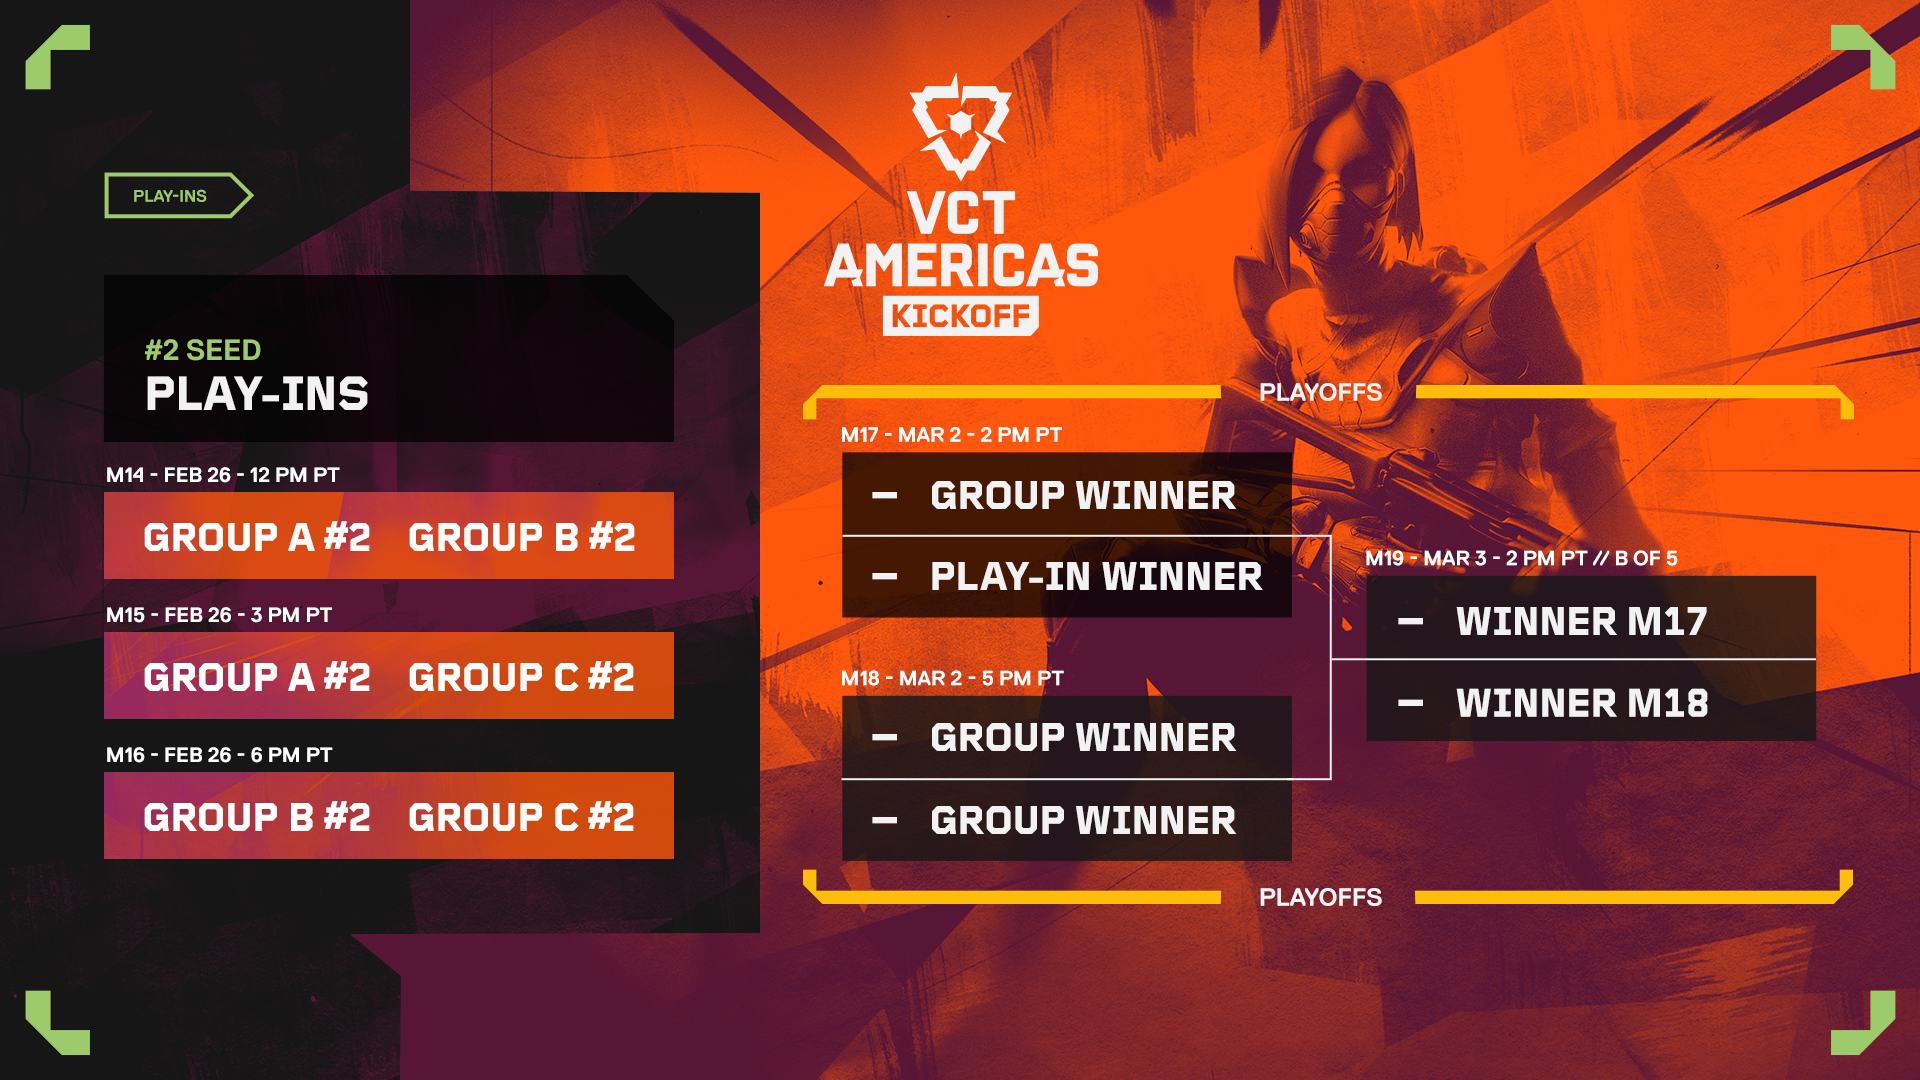 The play-in and playoff formats for the VCT Americas Kickoff tournament.